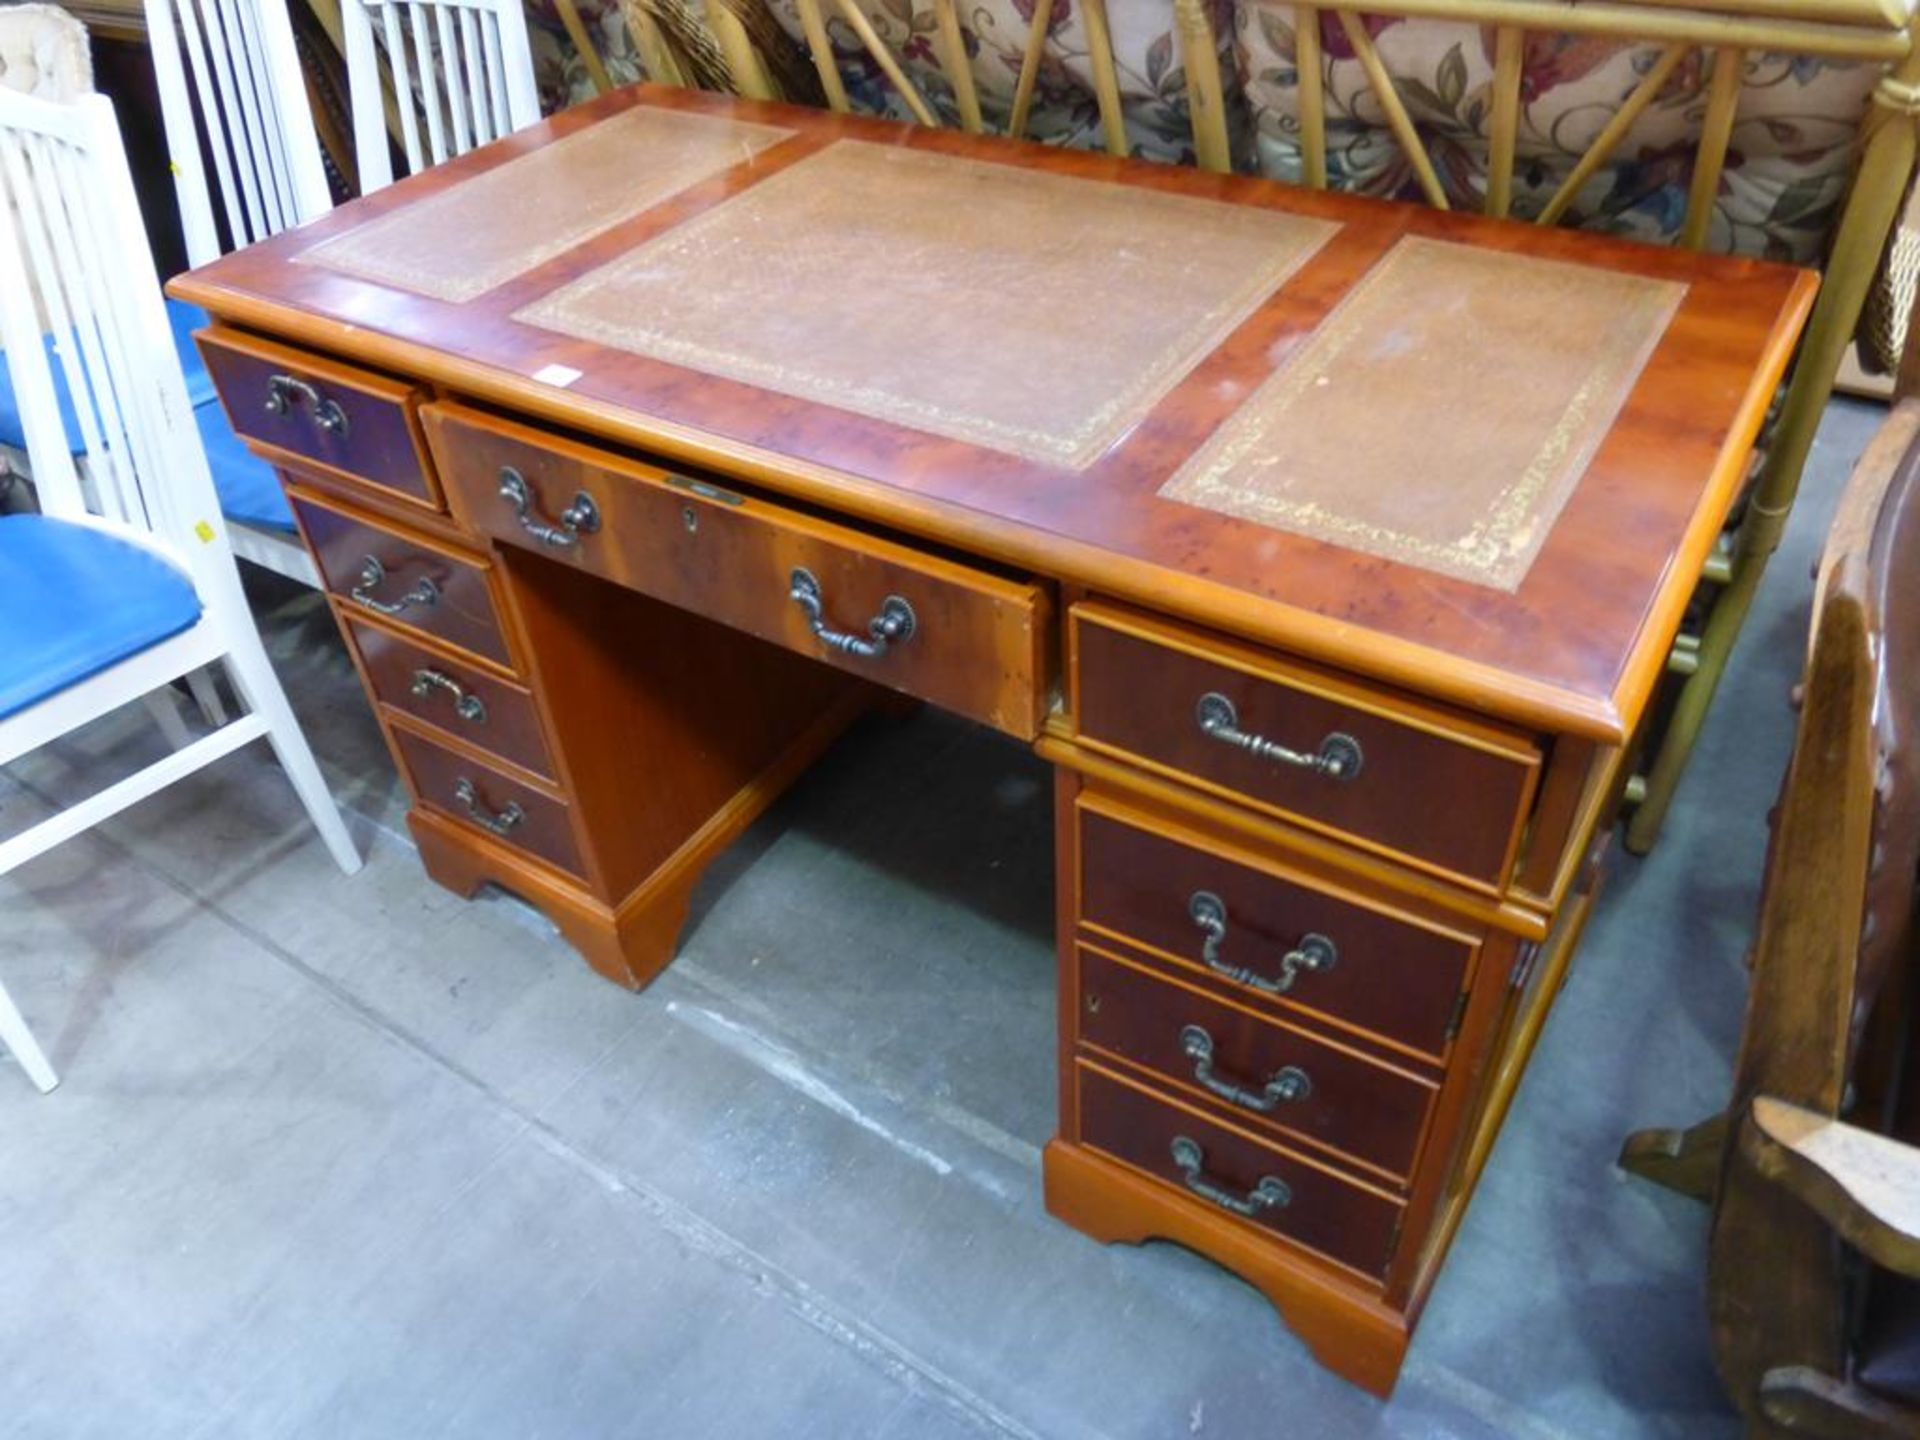 A Reproduction Yew Wood Pedestal Desk with inset Leather Writing Surfaces, Three Frieze Drawers